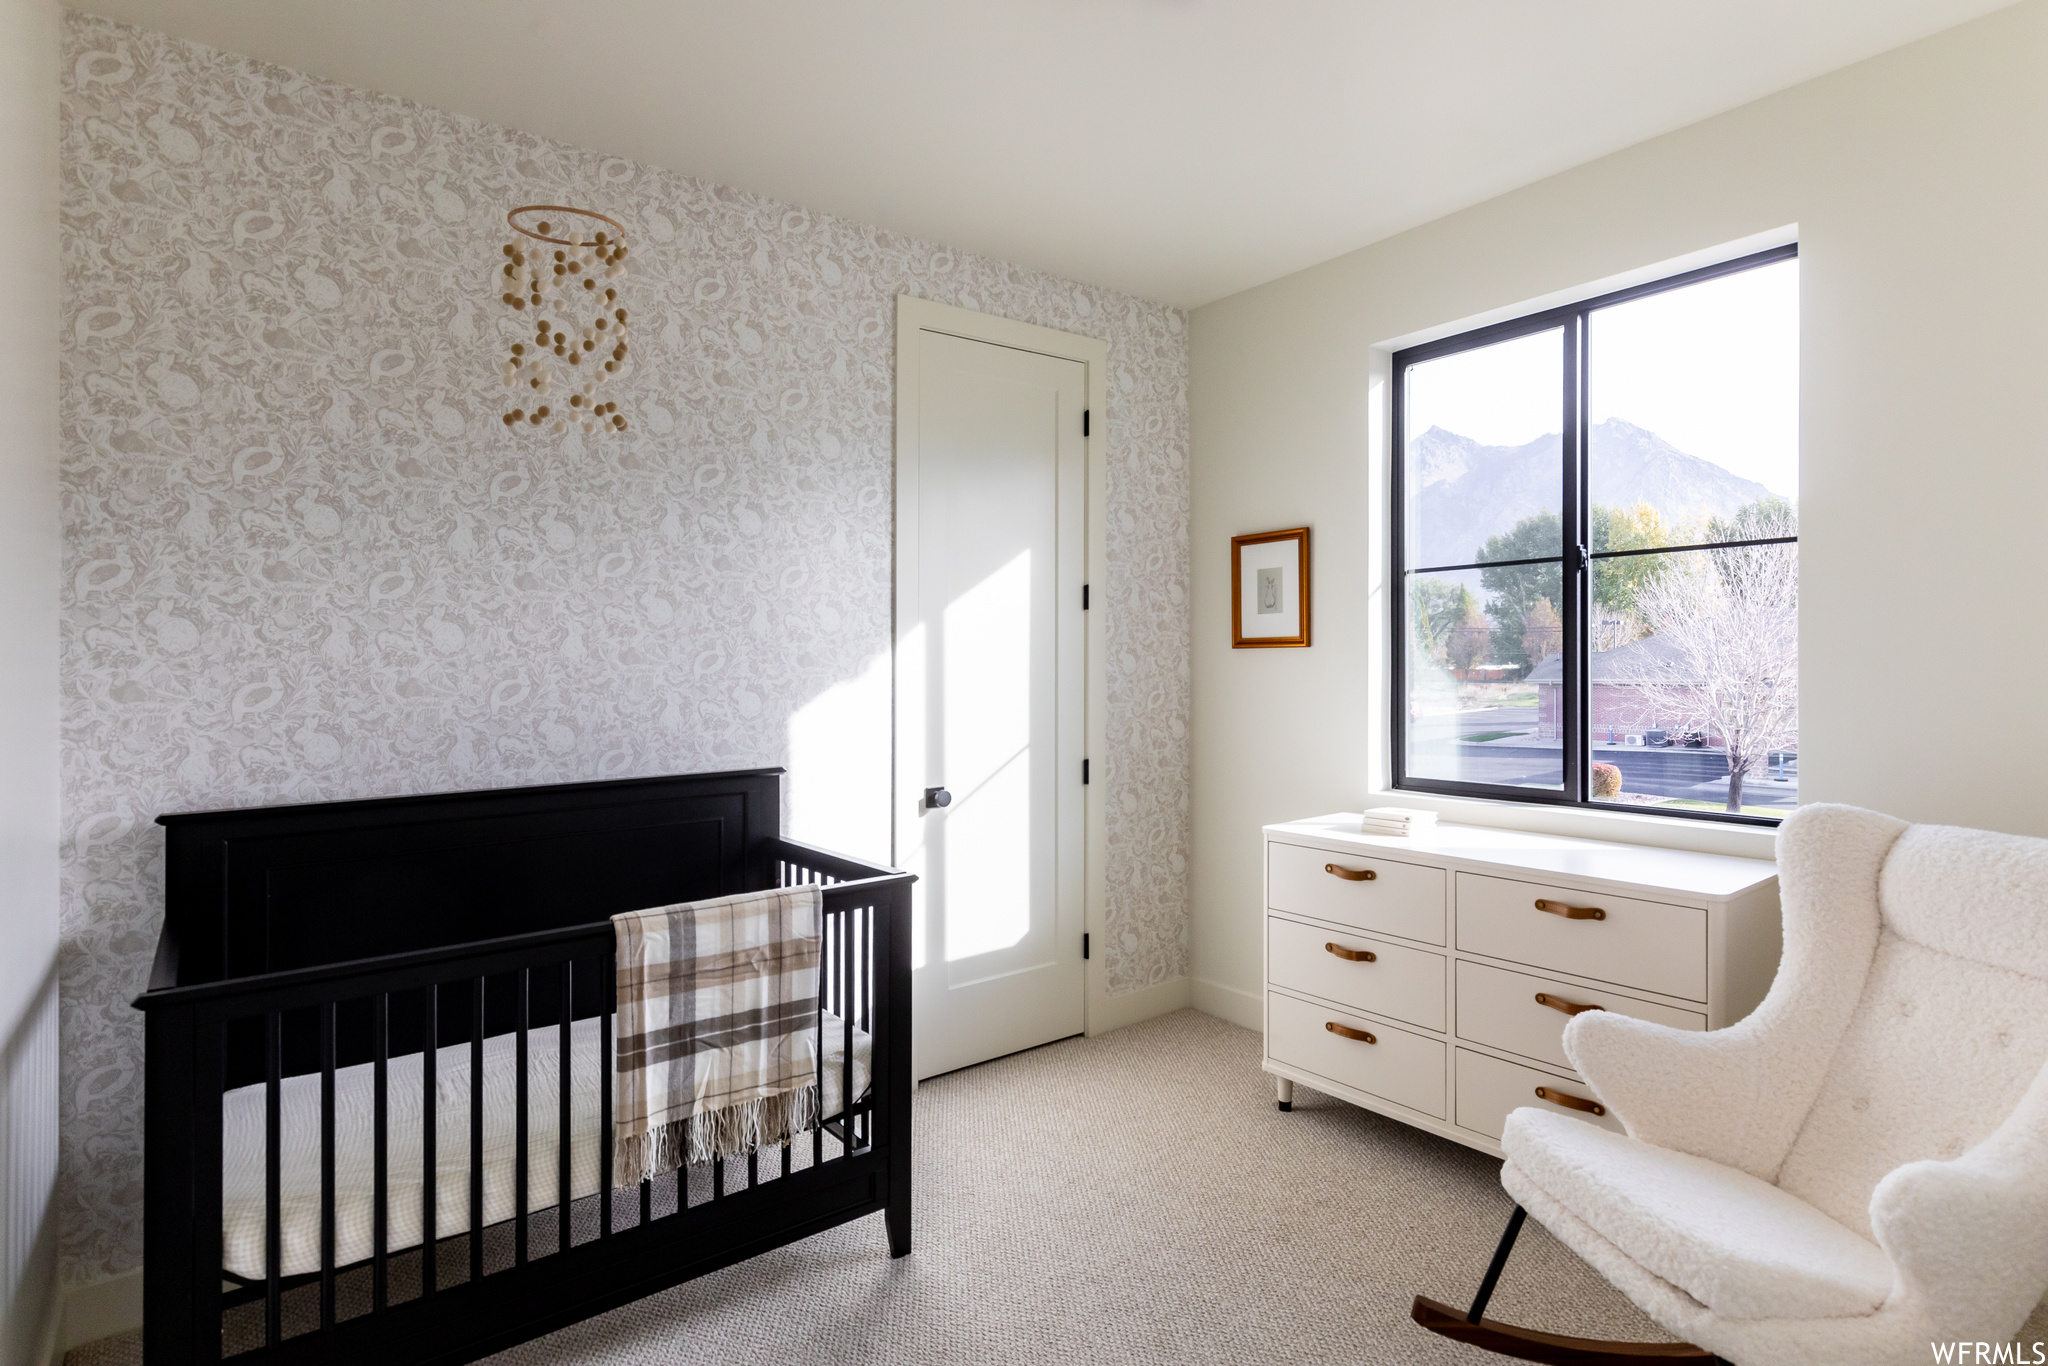 Carpeted bedroom with multiple windows, a crib, and a mountain view